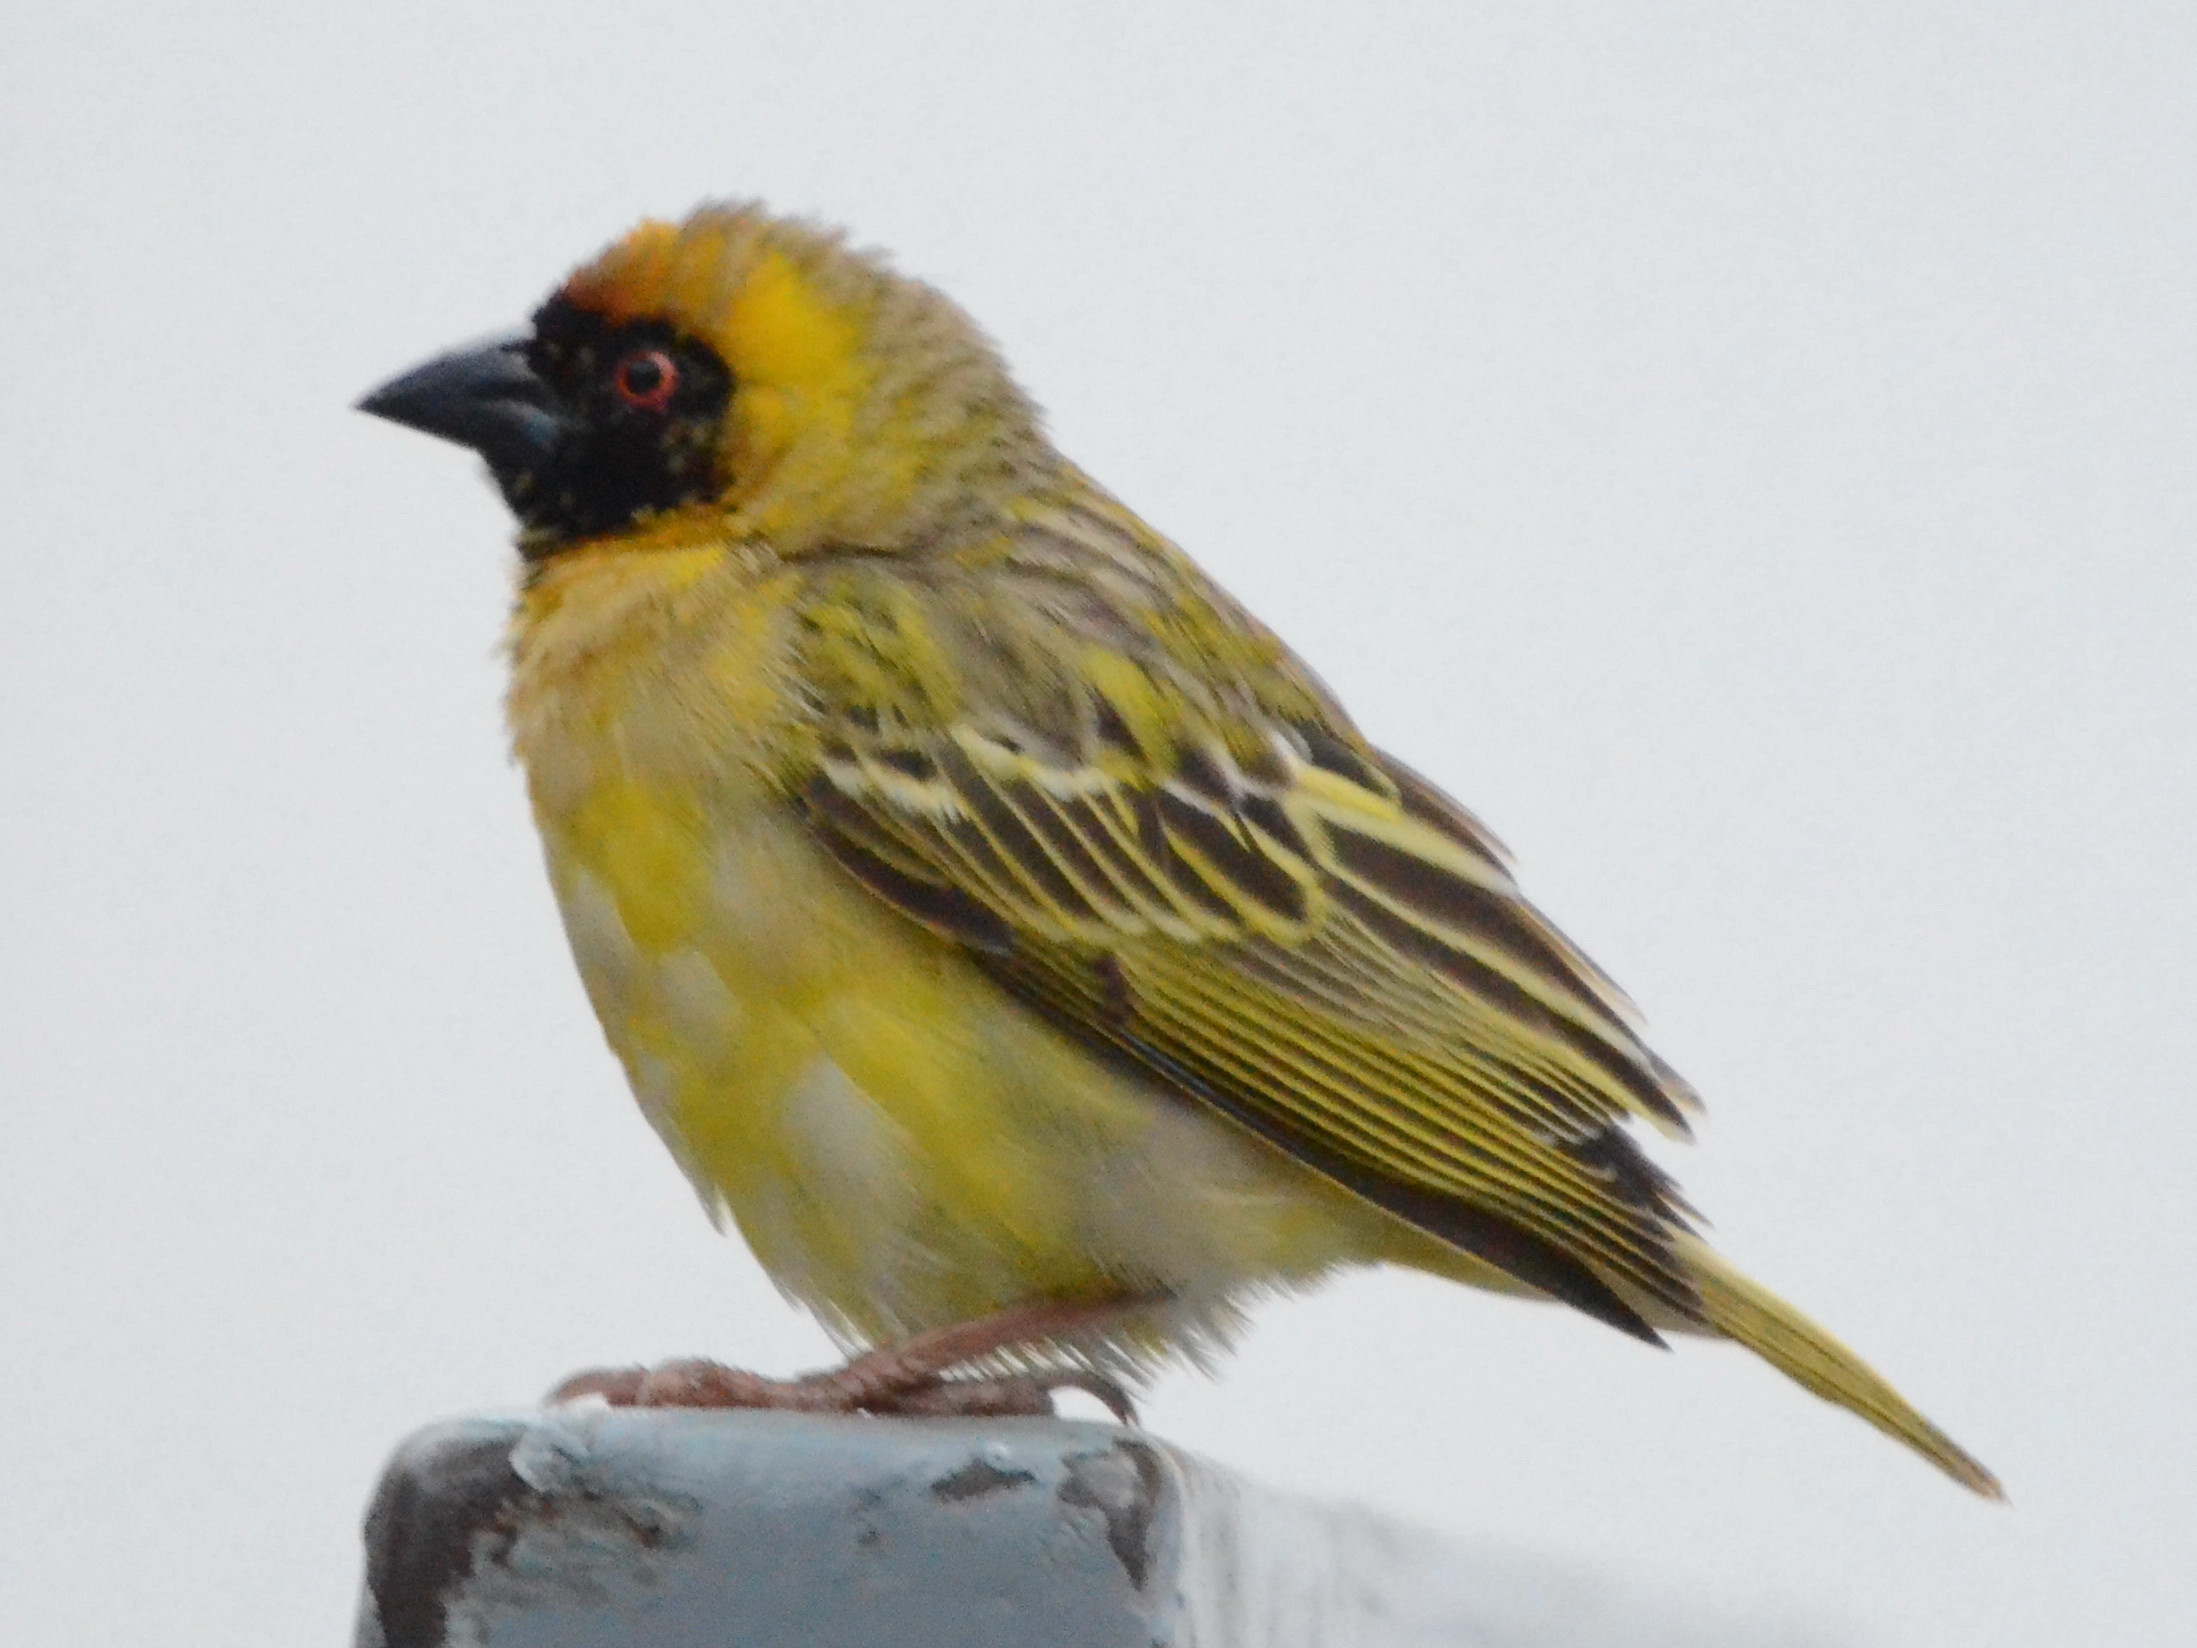 Click picture to see more Southern Masked-Weavers.